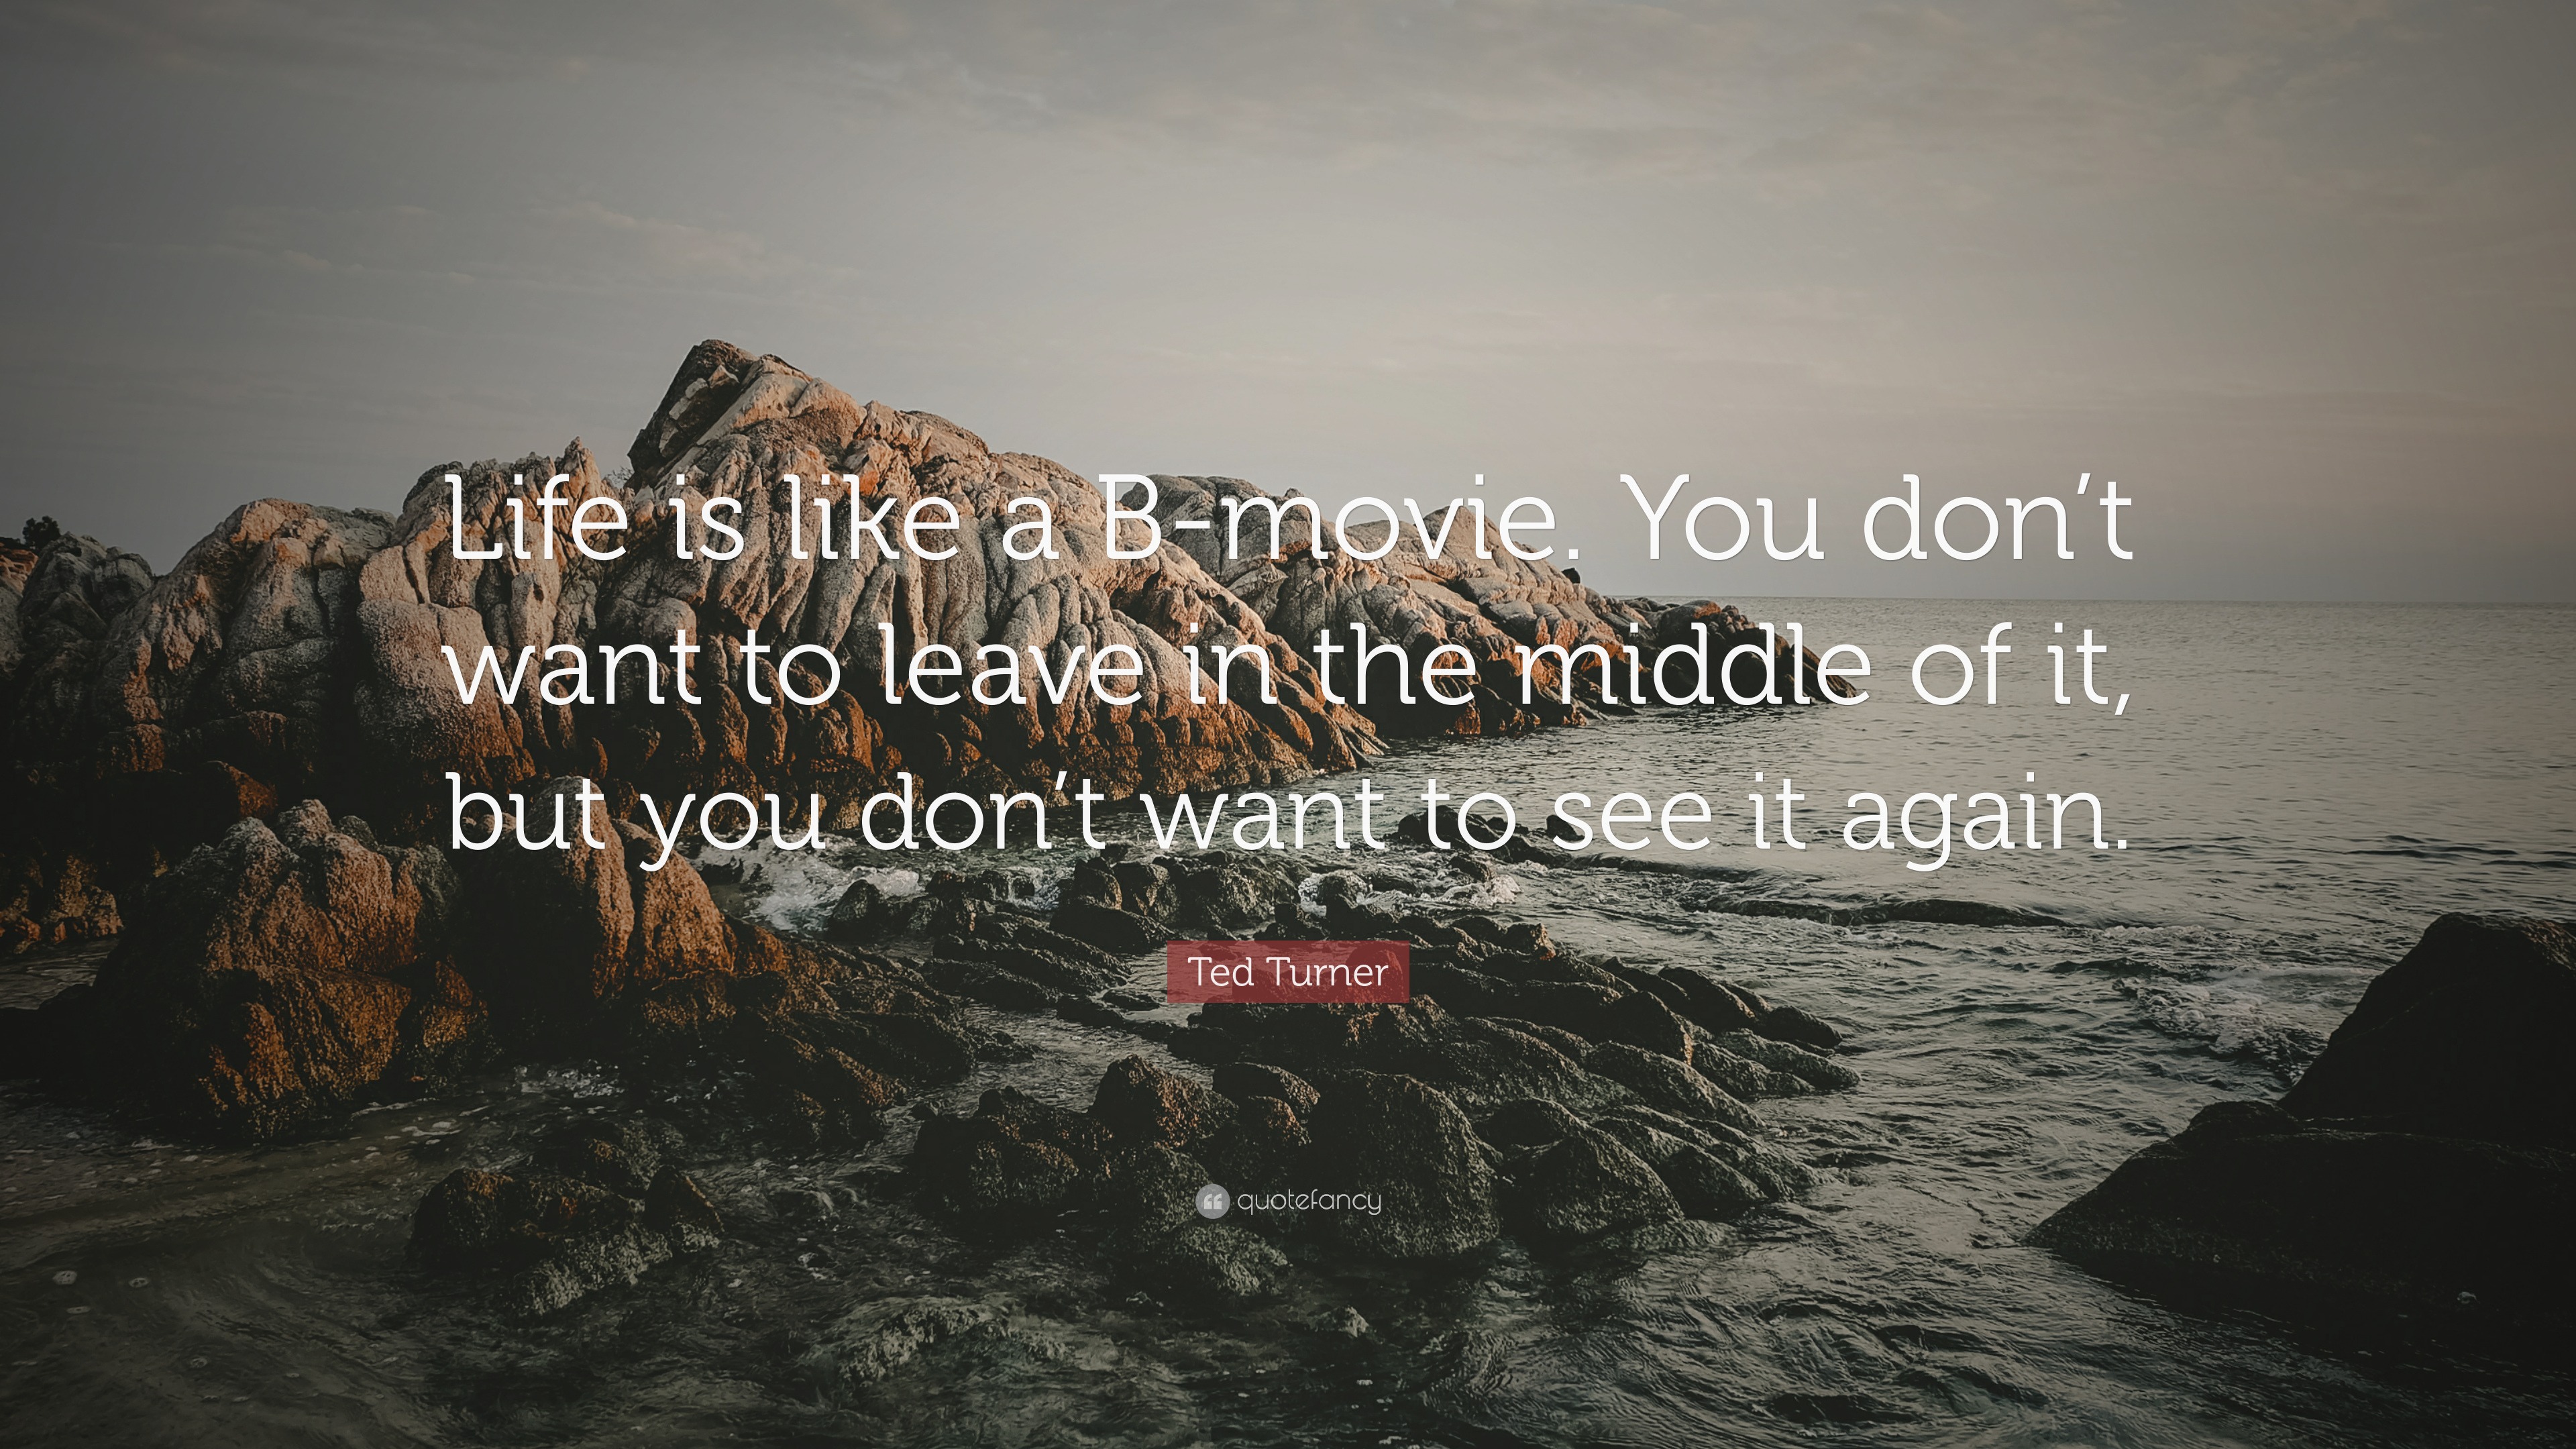 Ted Turner Quote: “Life is like a B-movie. You don't want to leave in